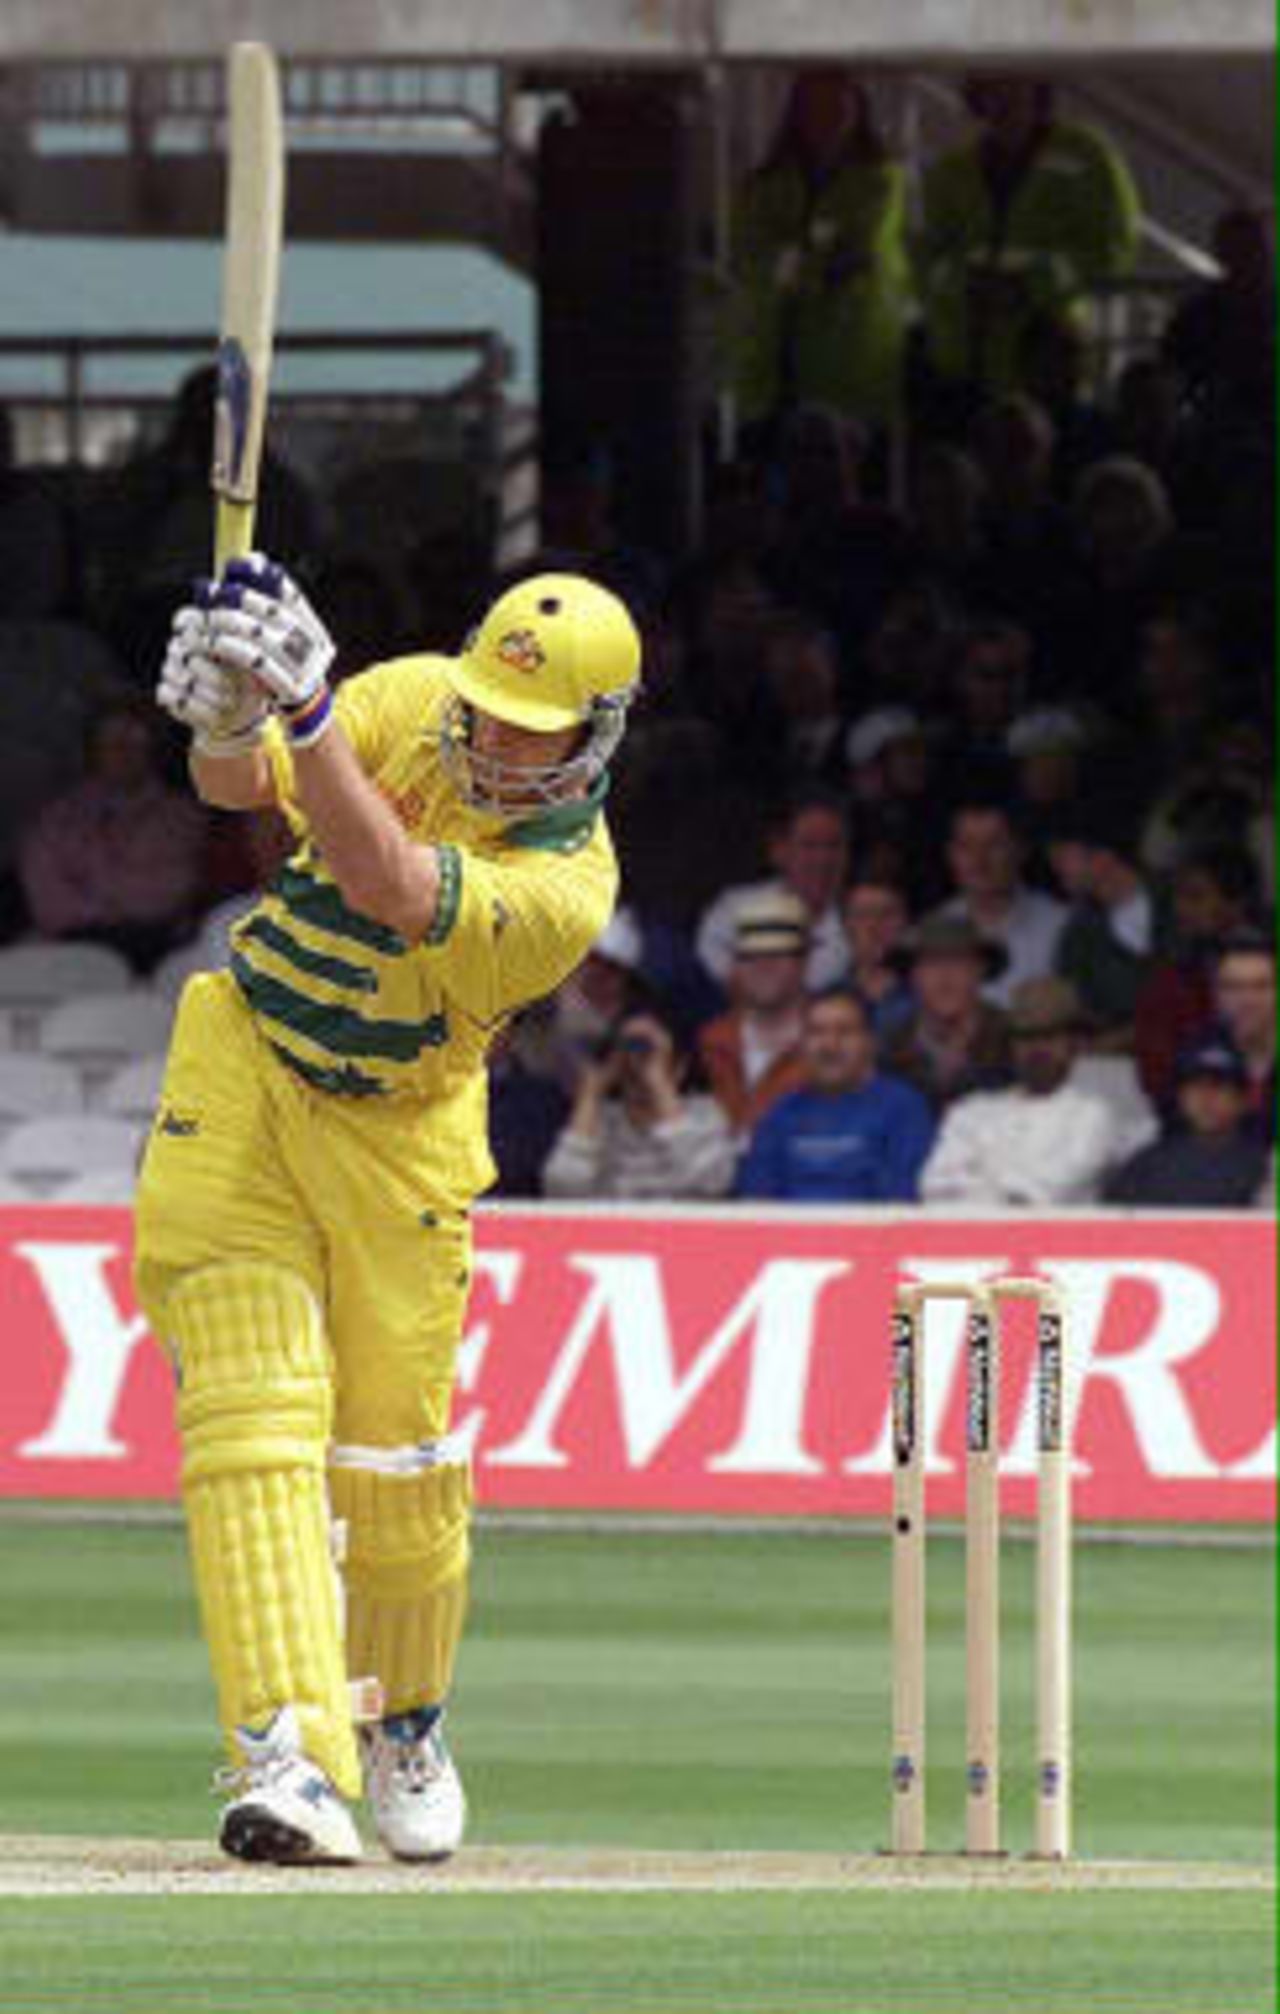 Australia`s Adam Gilchrist lbw off Neil Johnson bowling in the match between Zimbabwe v Australia in the Cricket World Cup match at Lord's 9 June 1999.